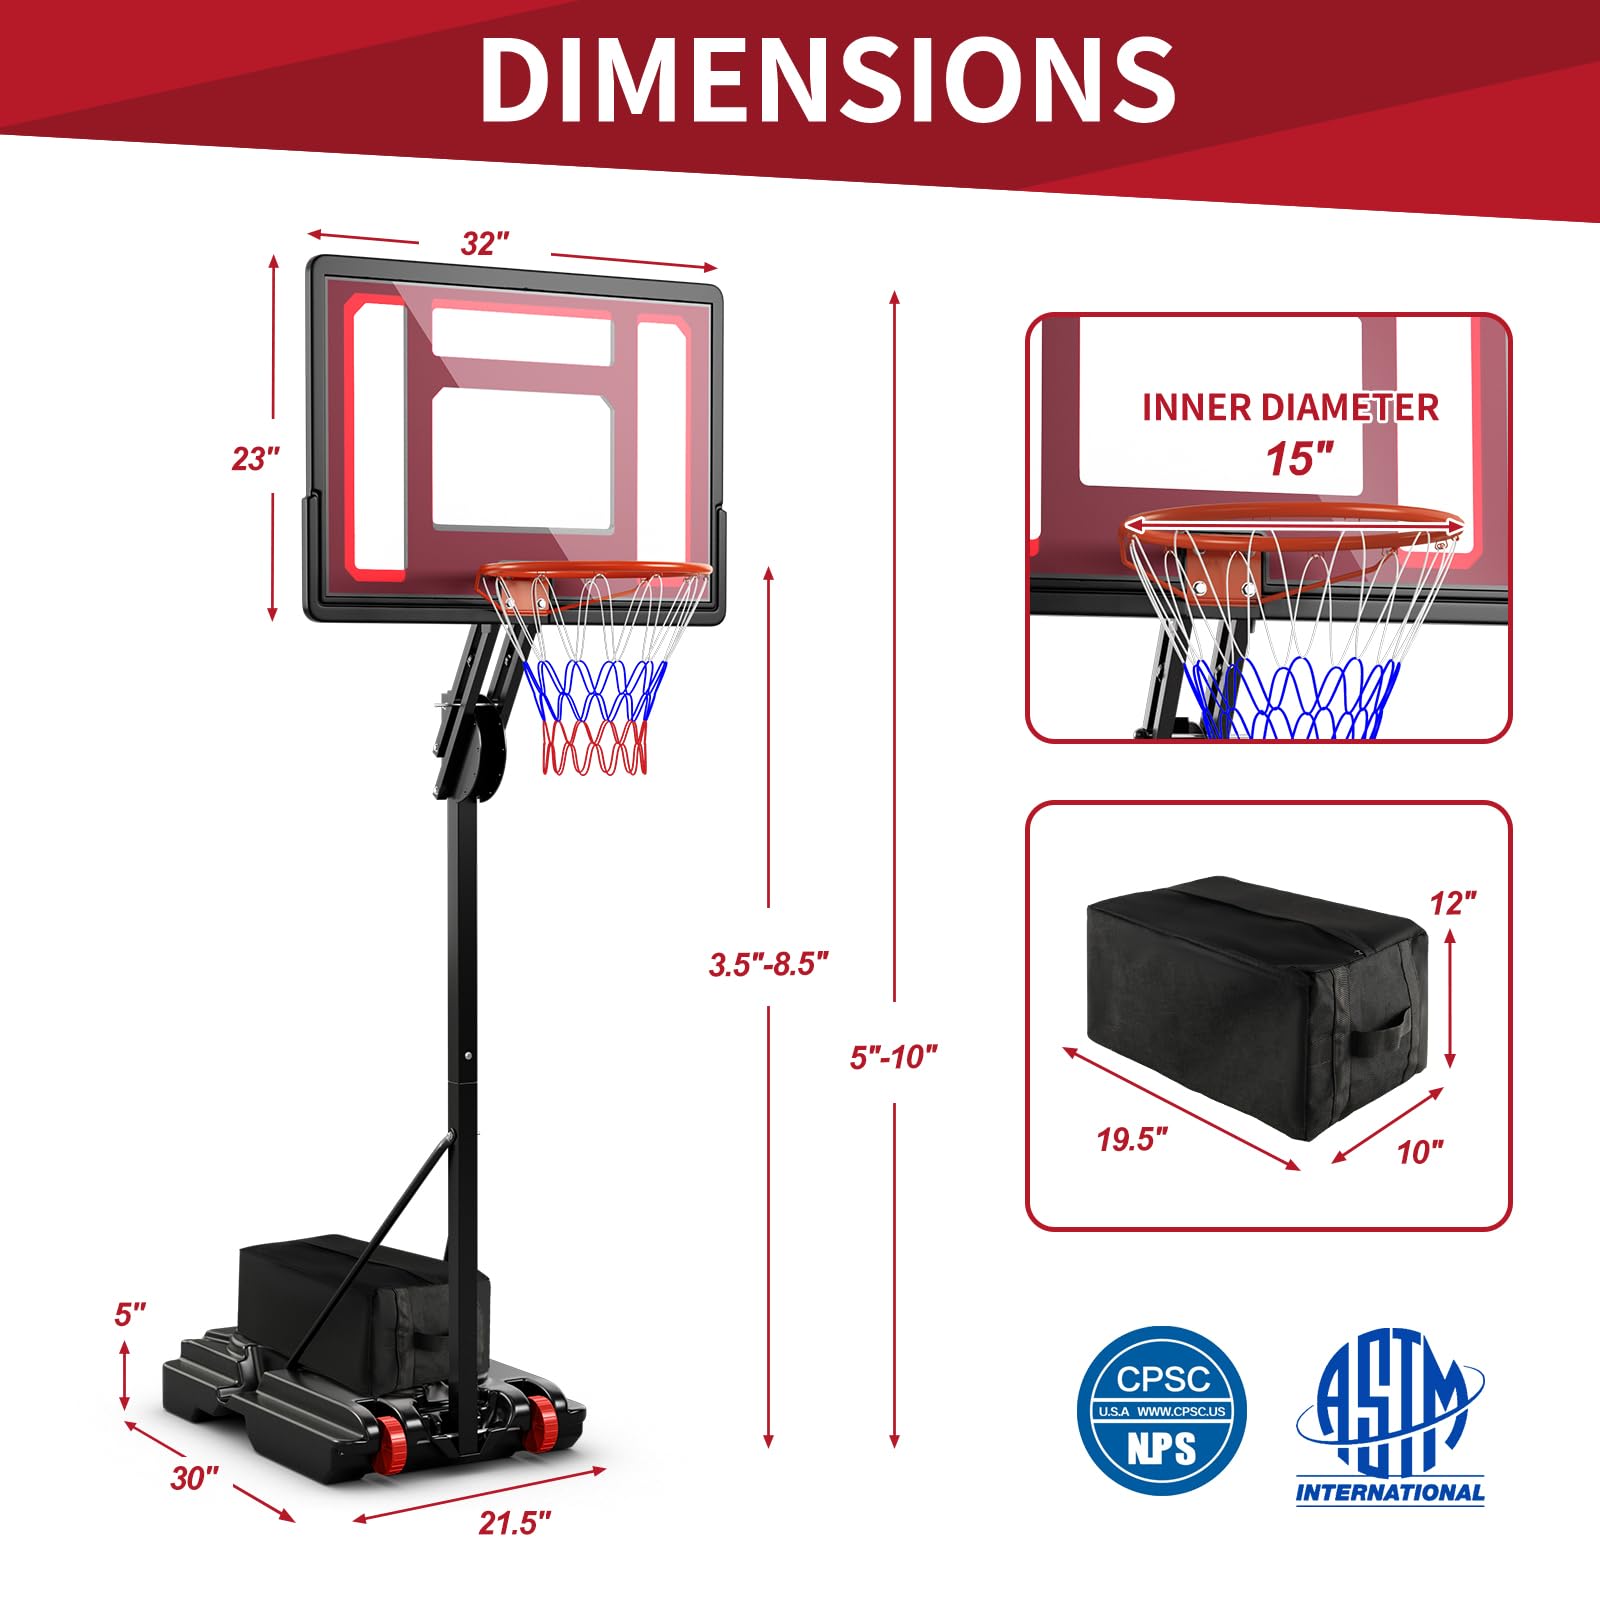 Giantex 10 Ft Basketball Hoop Outdoor - 5 FT to 10 FT Height Adjustable Indoor Portable Basketball Goal System with 2 Wheels